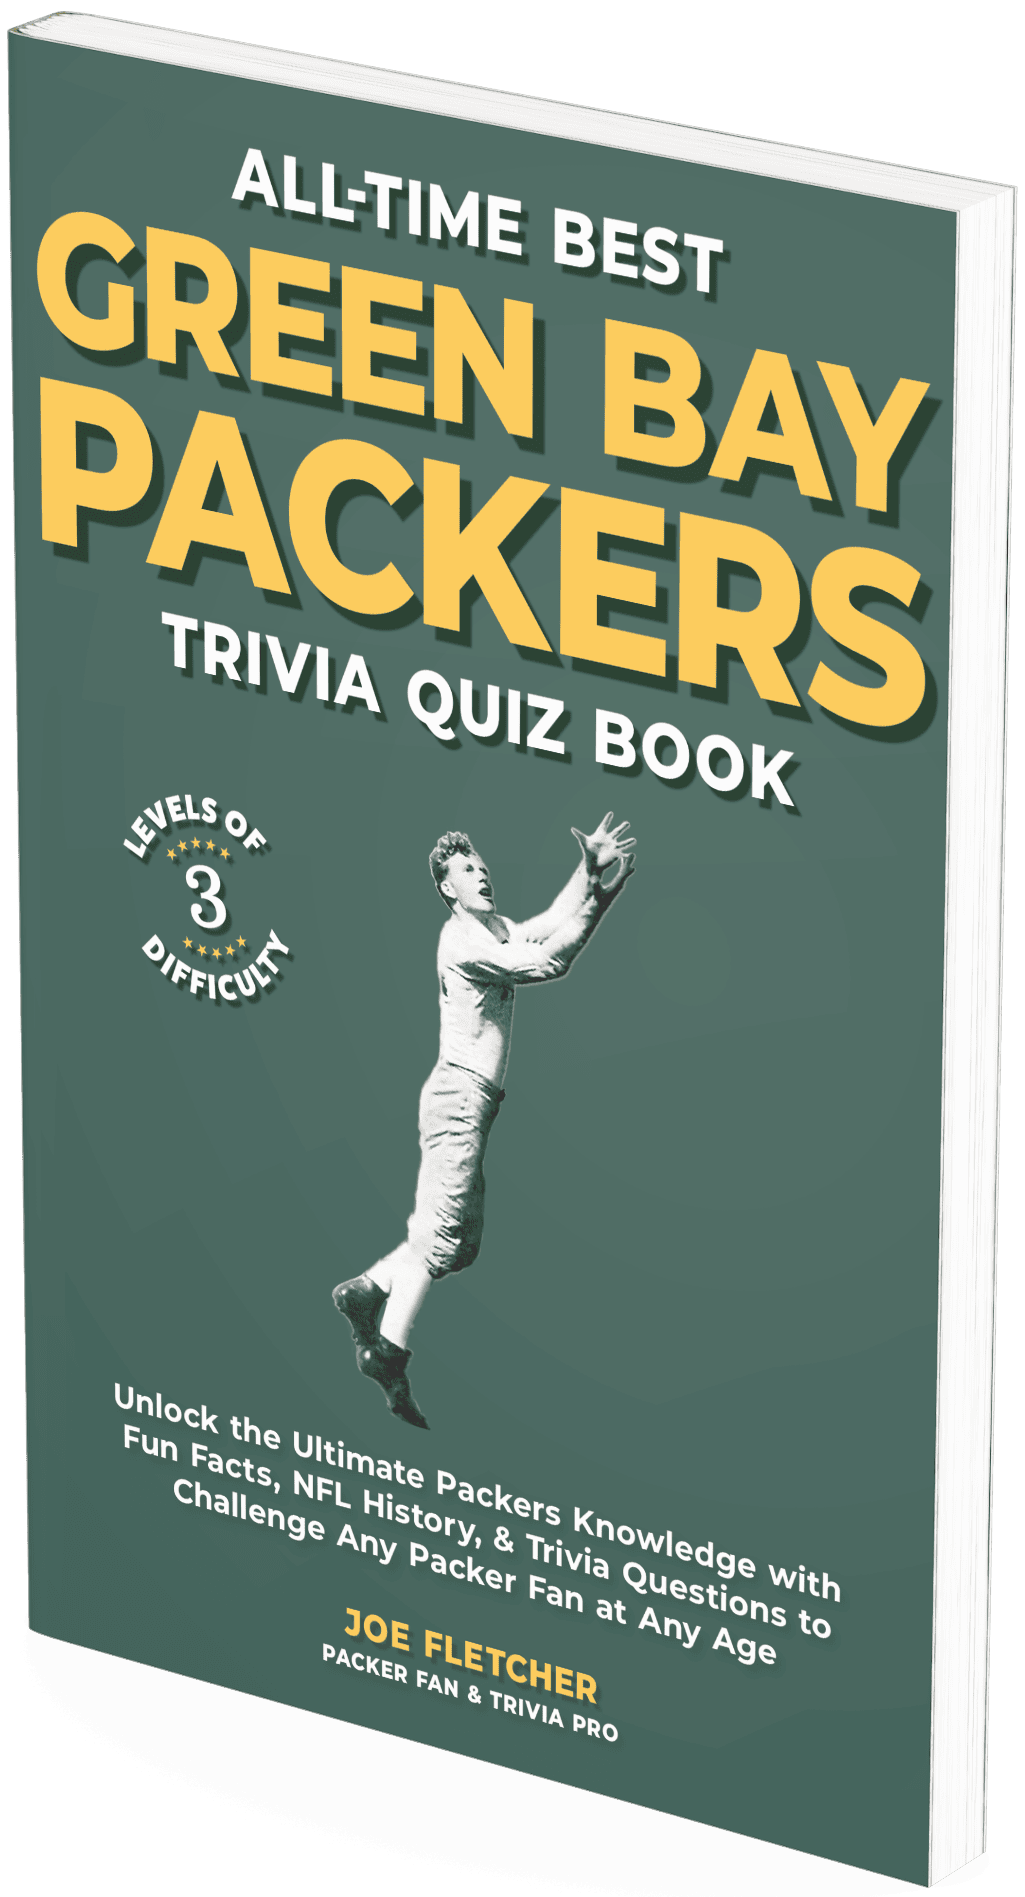 All Time Best Green Bay Packers Trivia Quiz Book